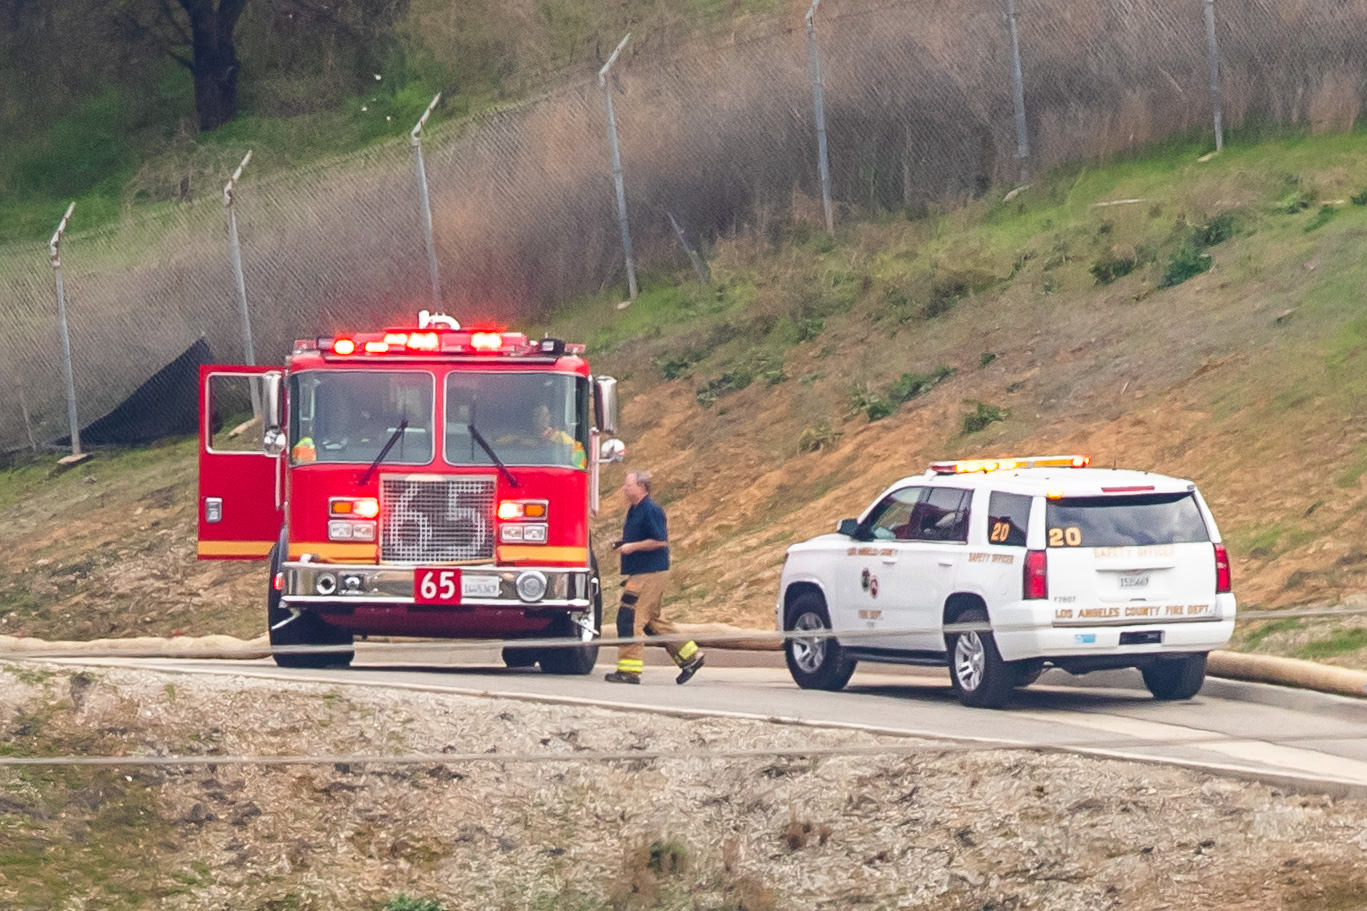 A firetruck and a police vehicle at the site of a helicopter crash on January 26, 2020, in Calabasas, California